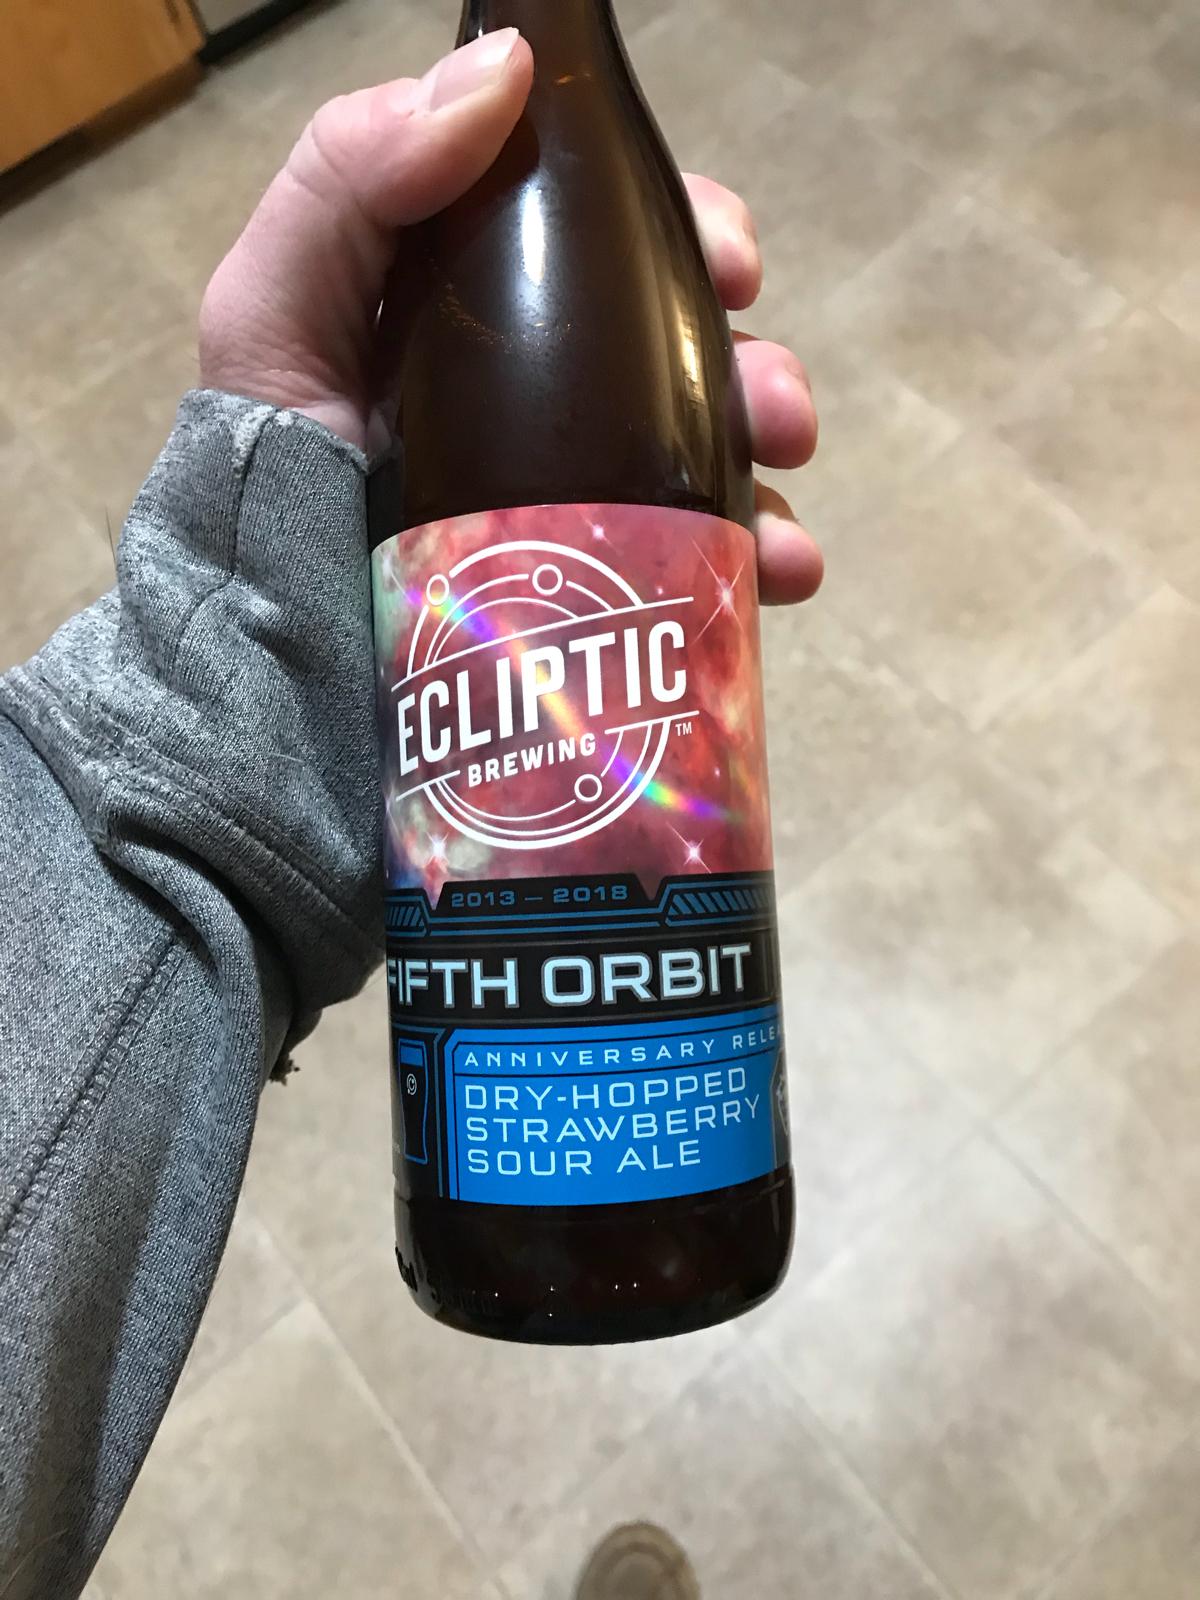 Fifth Orbit Dry Hopped Strawberry Sour Ale 